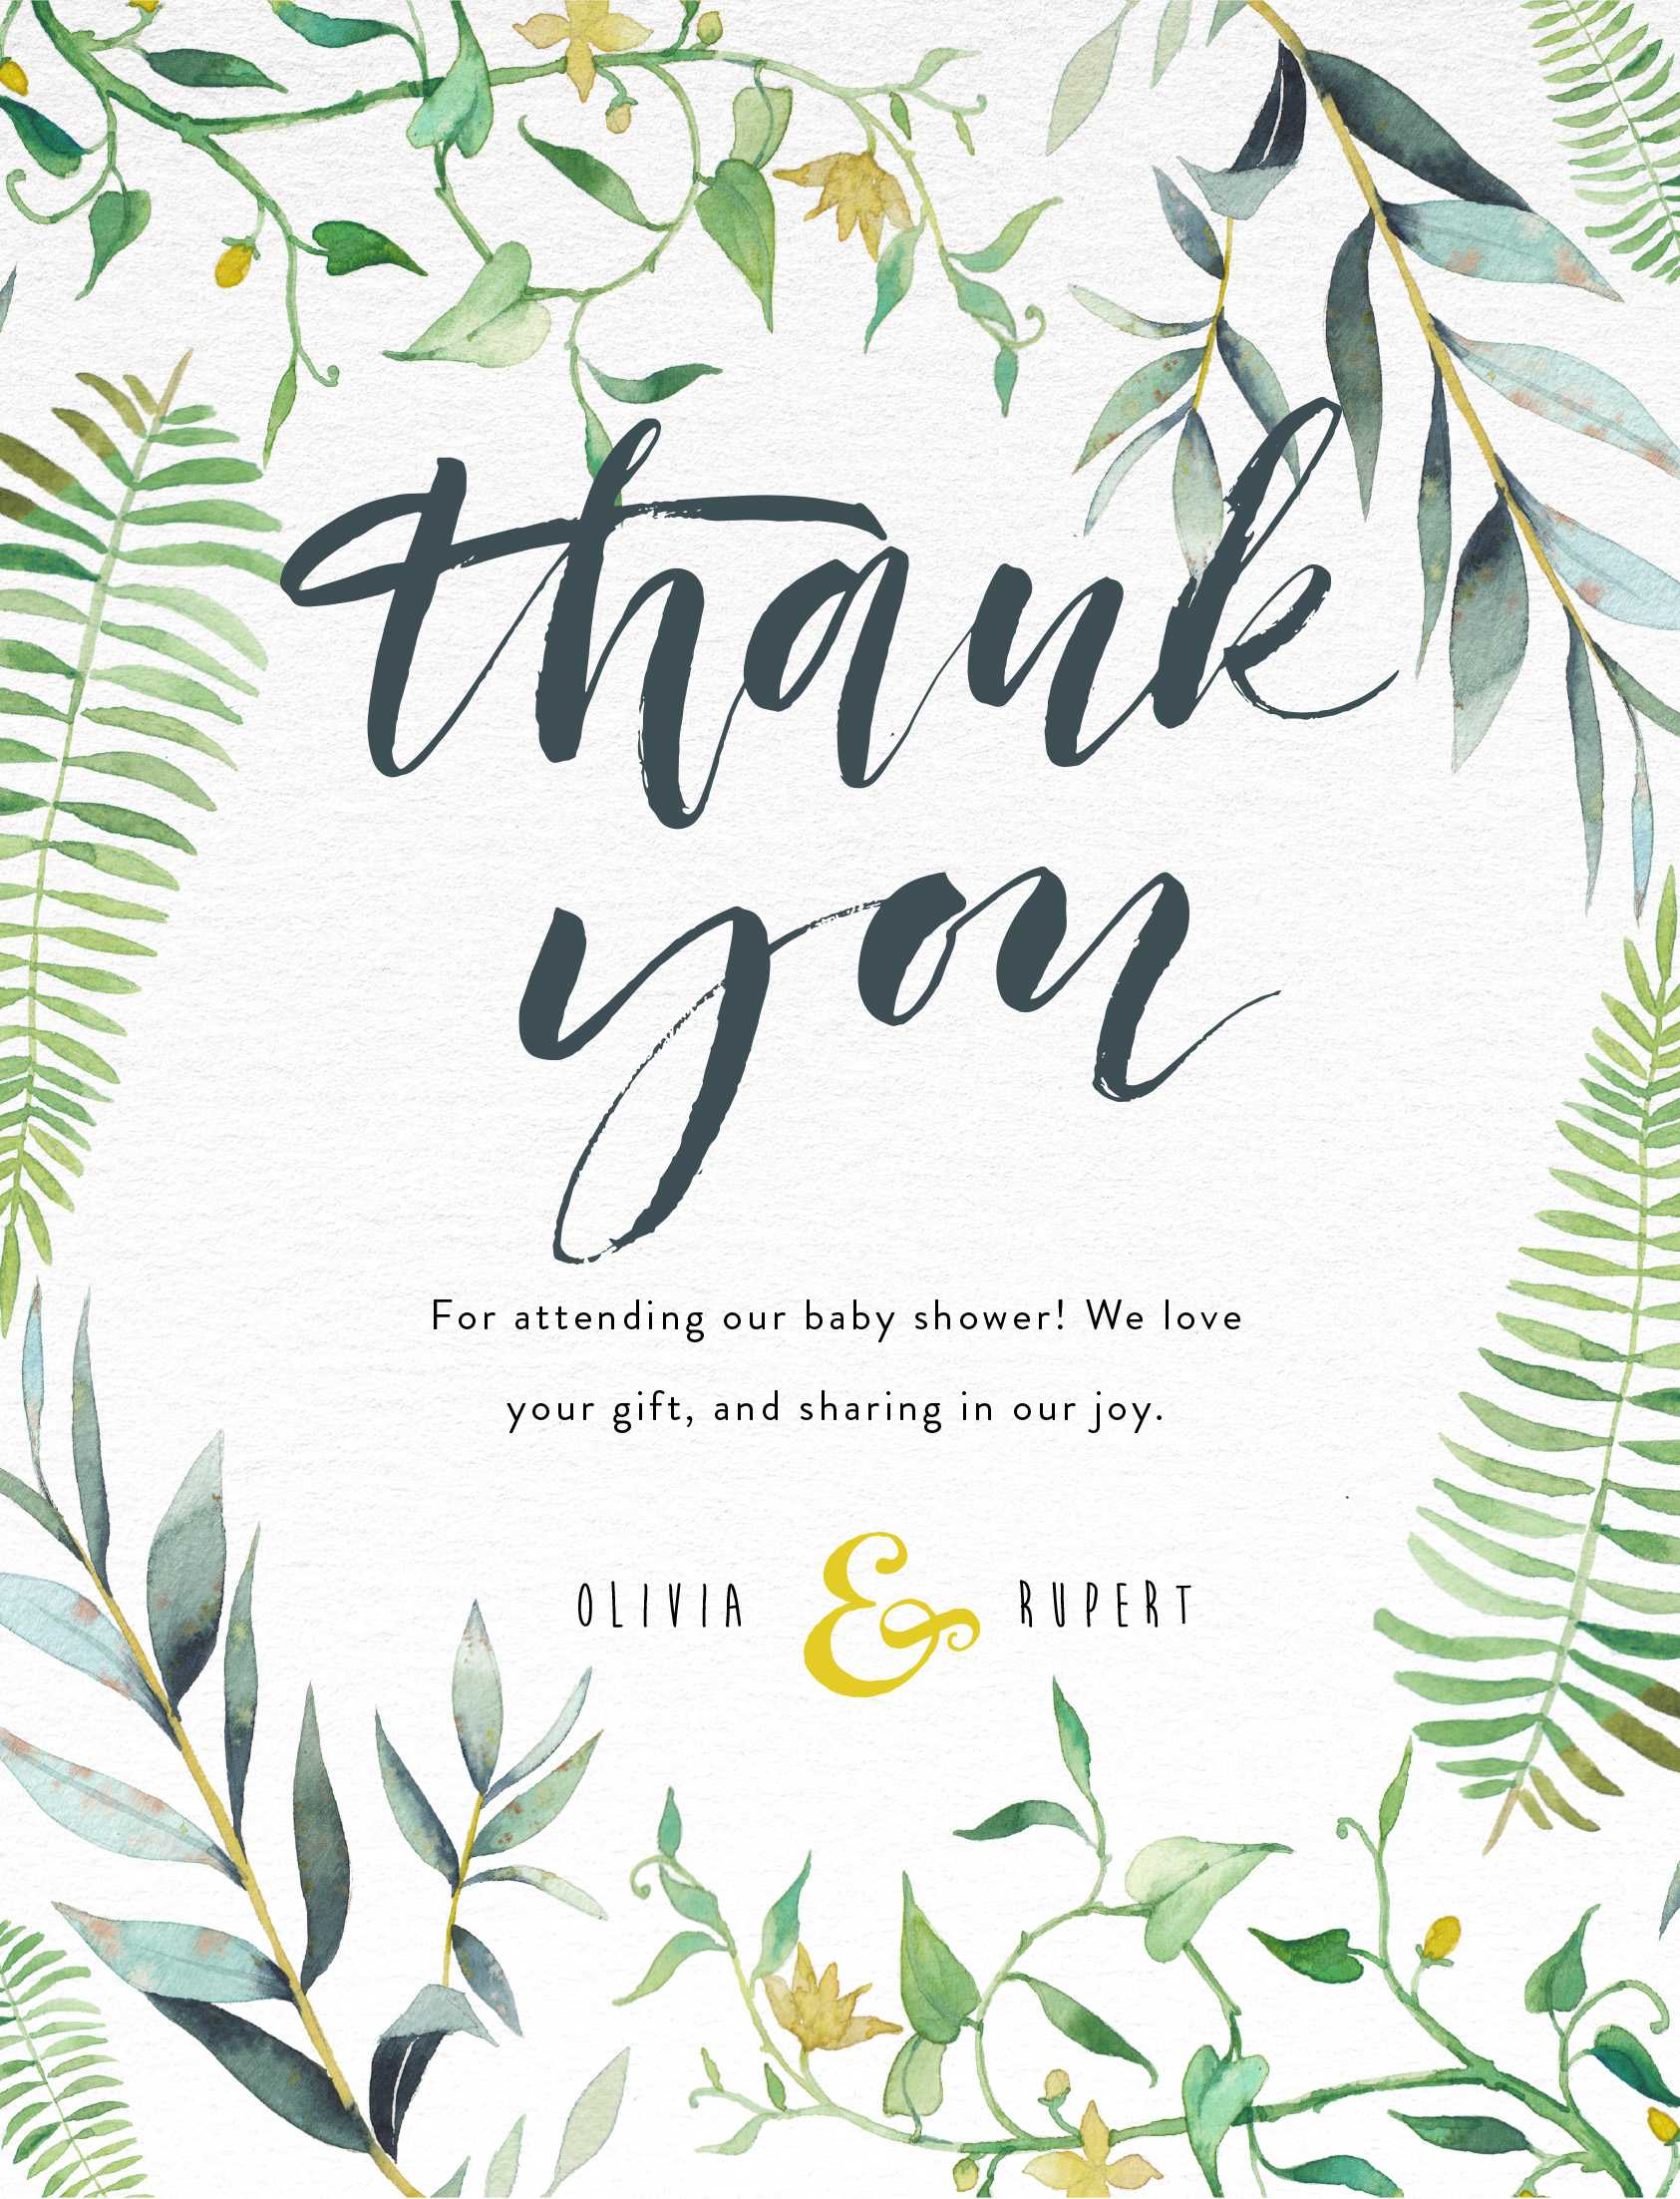 Baby Shower Thank You Cards | Paperlust Regarding Template For Baby Shower Thank You Cards